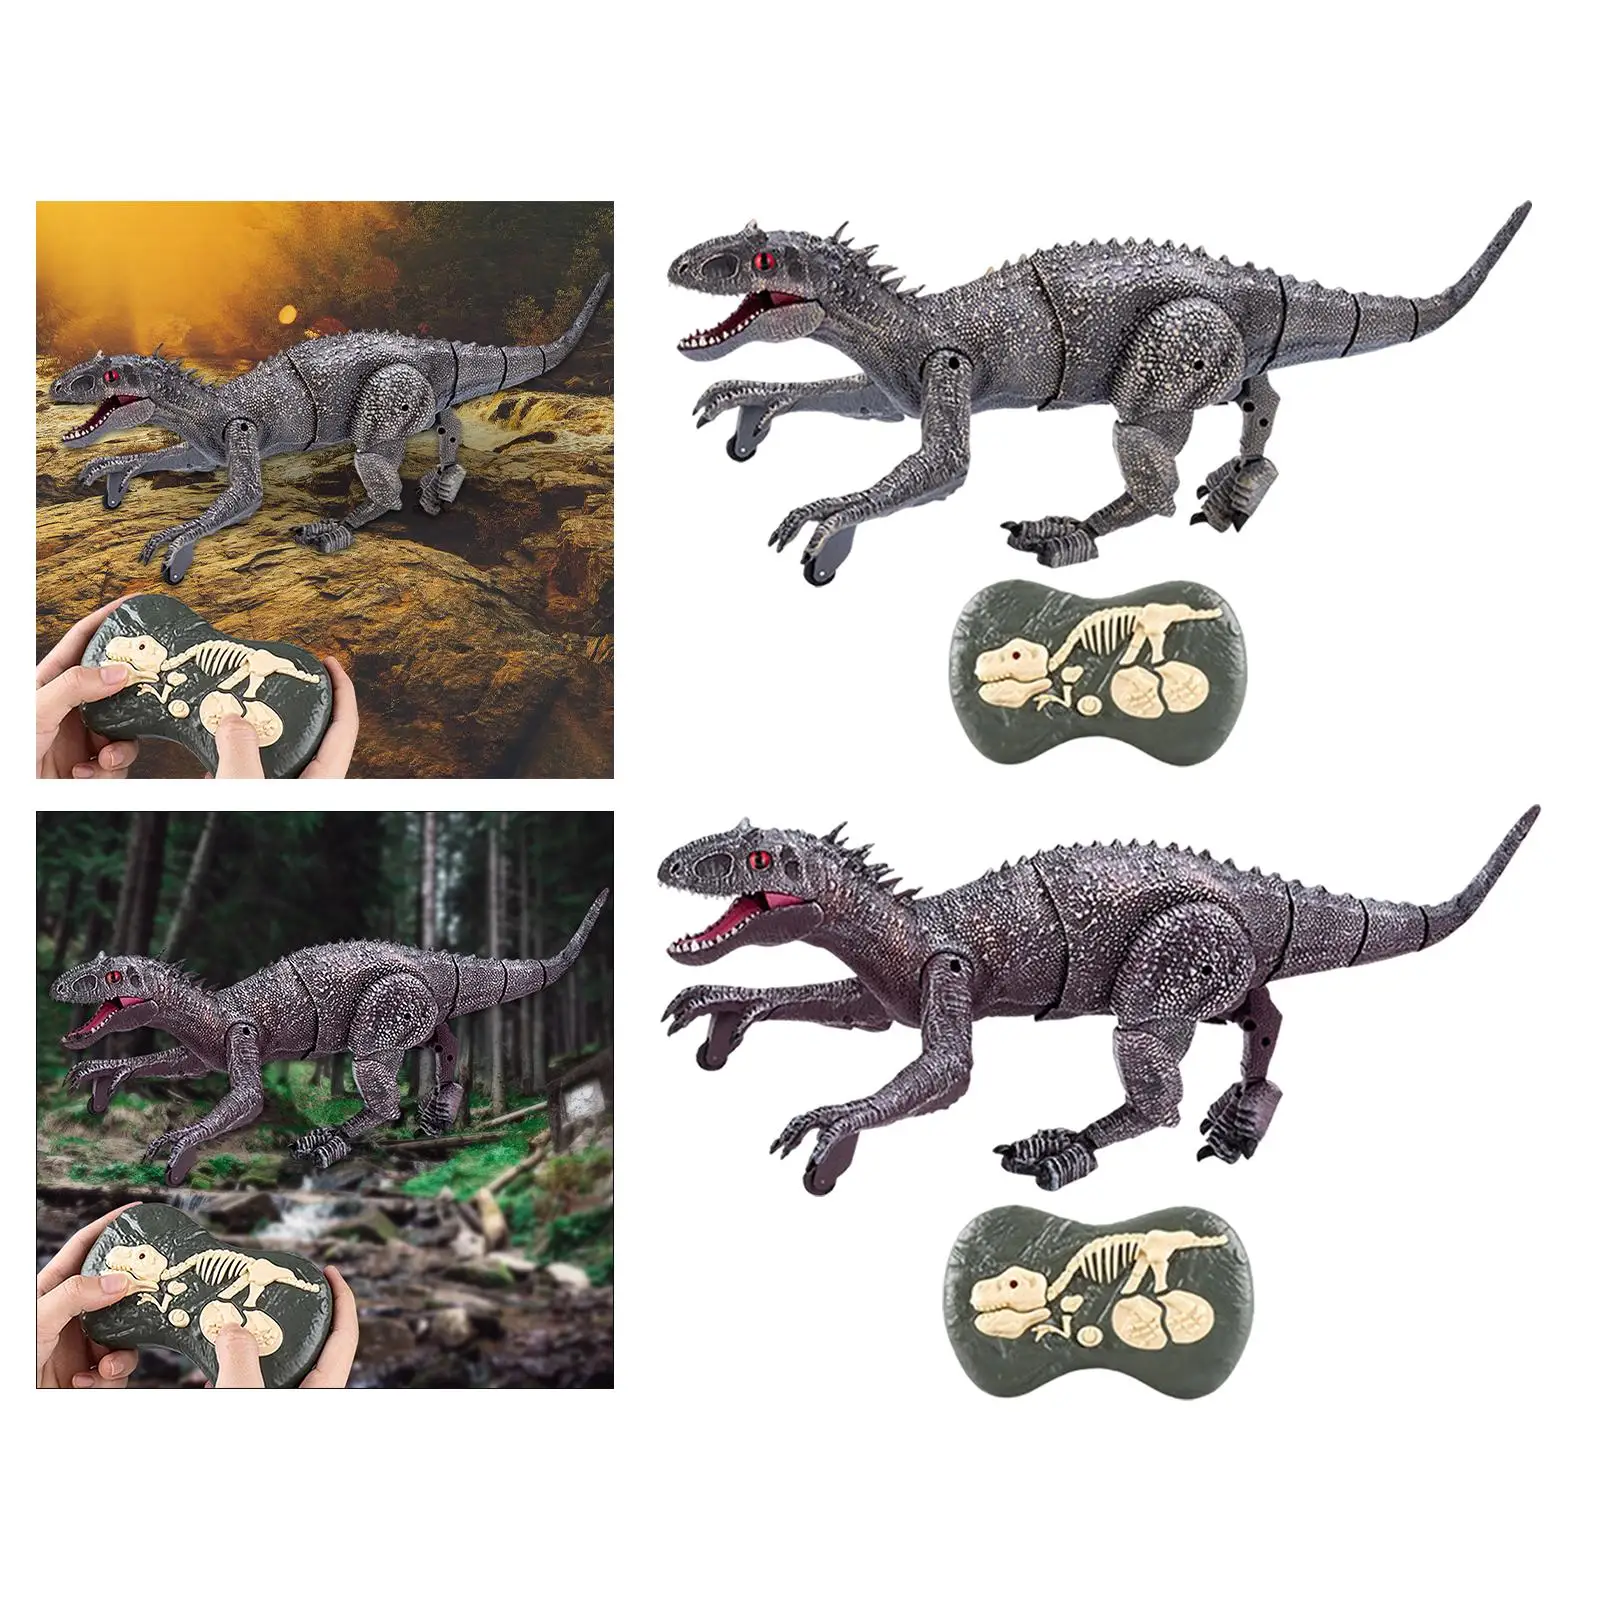  RC Dinosaur Toys Walking Movement with Glowing Eyes for Boys Kids Toys Birthday Gifts